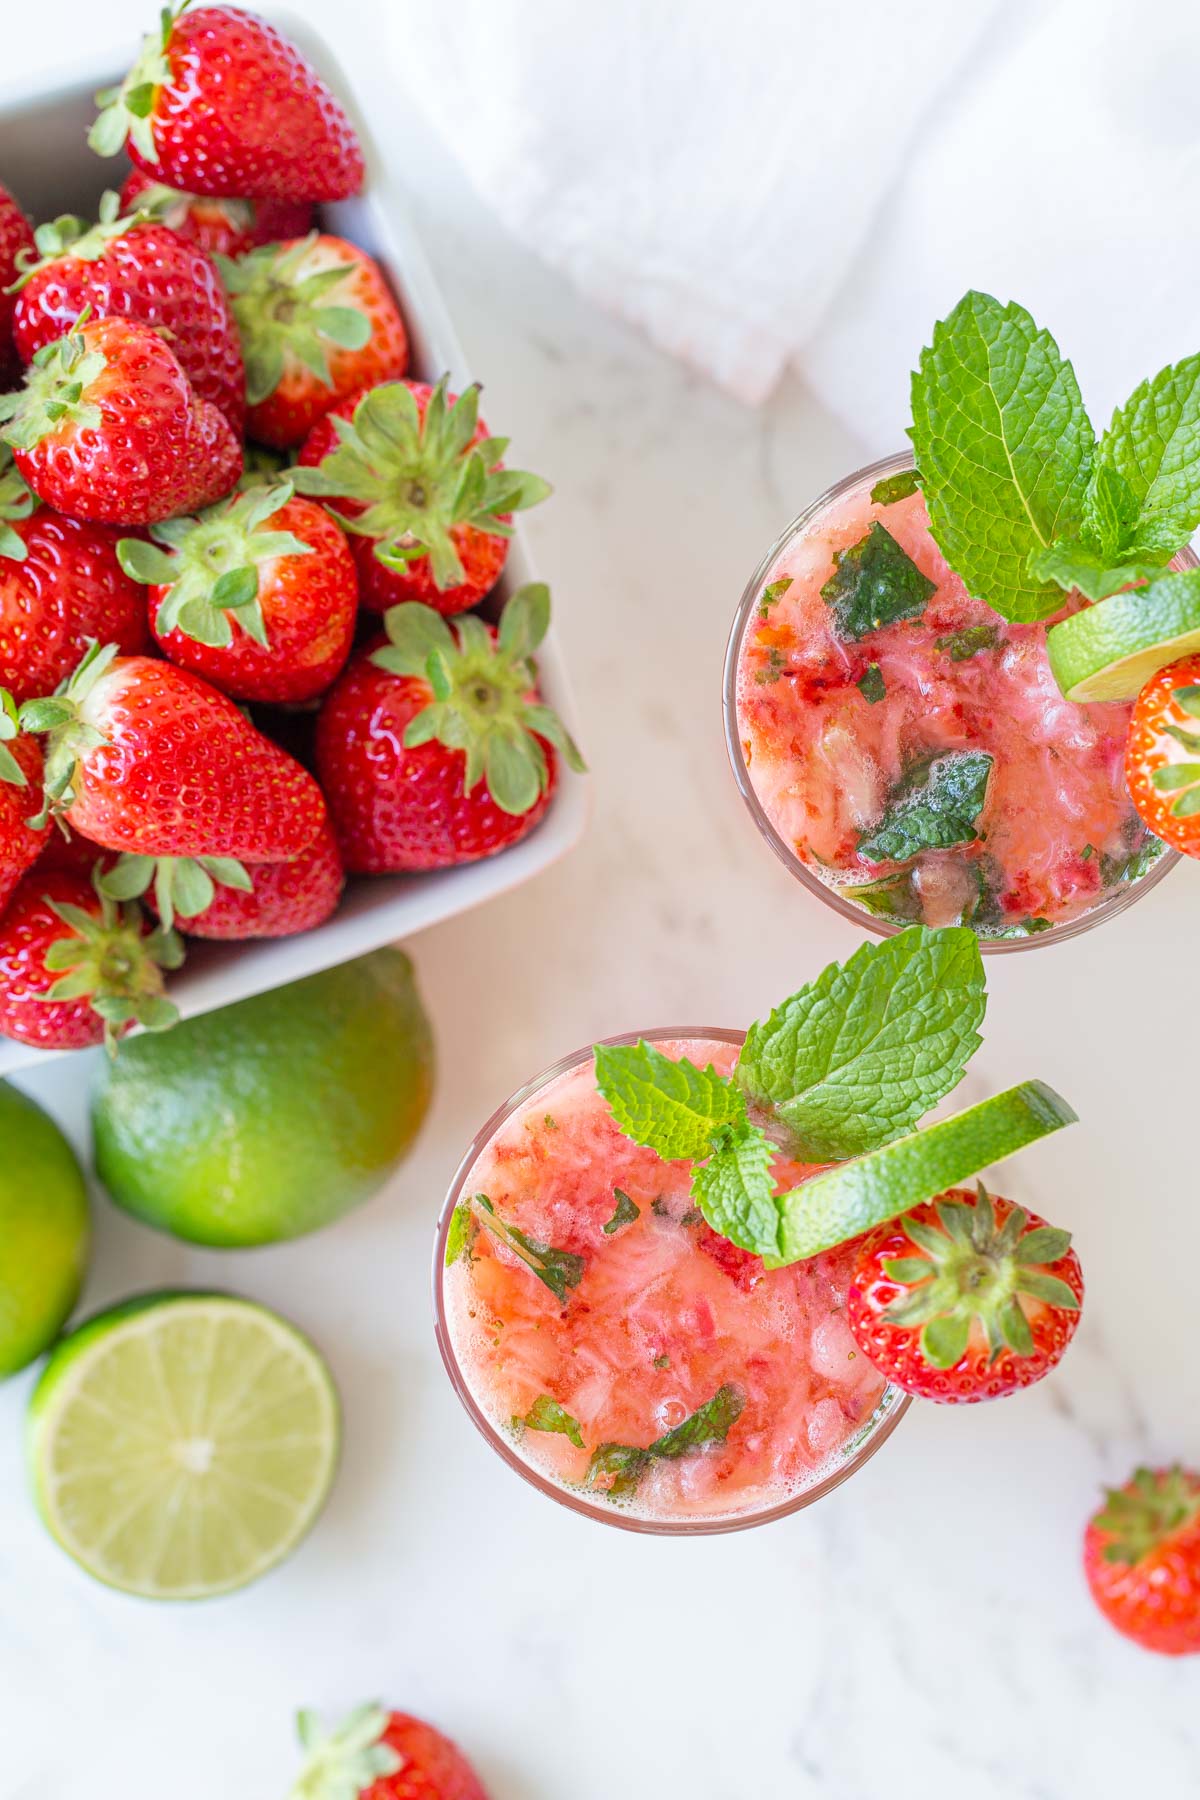 Overhead view of two strawberry mojitos by a container of fresh strawberries.